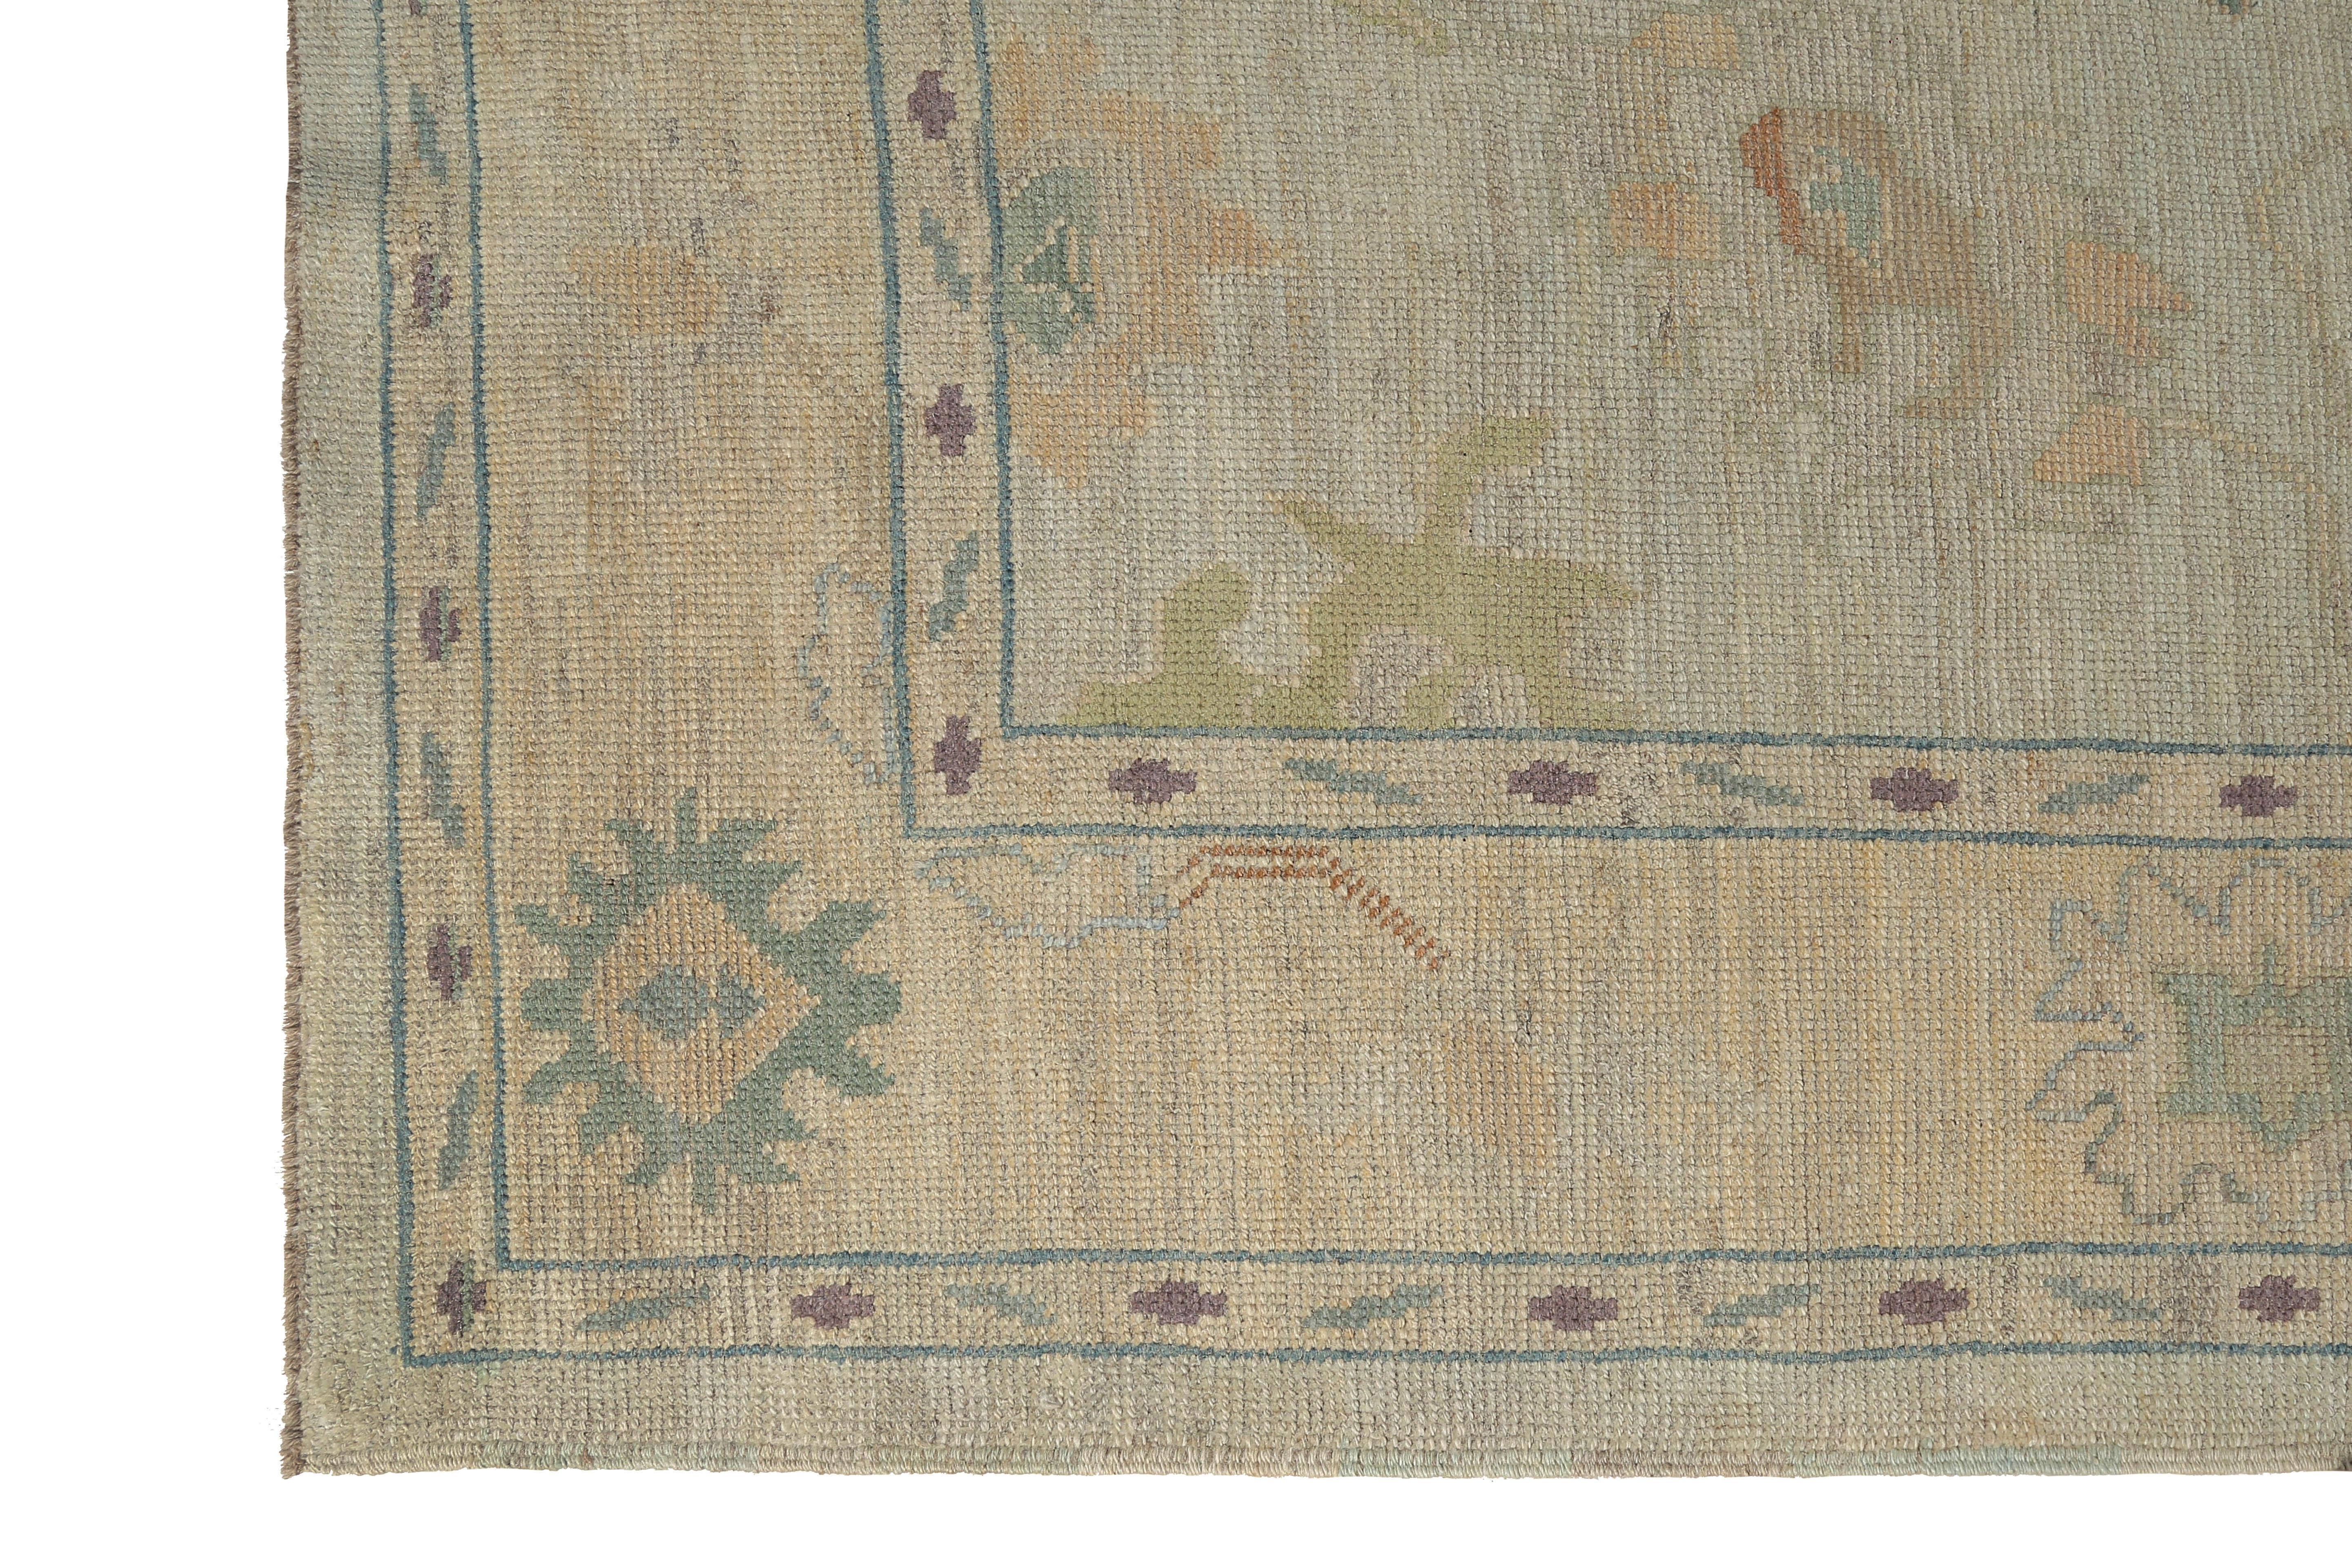 Introducing a stunning handmade Turkish Oushak rug that effortlessly blends modern design with traditional craftsmanship. The light beige background sets the perfect stage for the intricate coral and teal floral motifs, which add a pop of color and